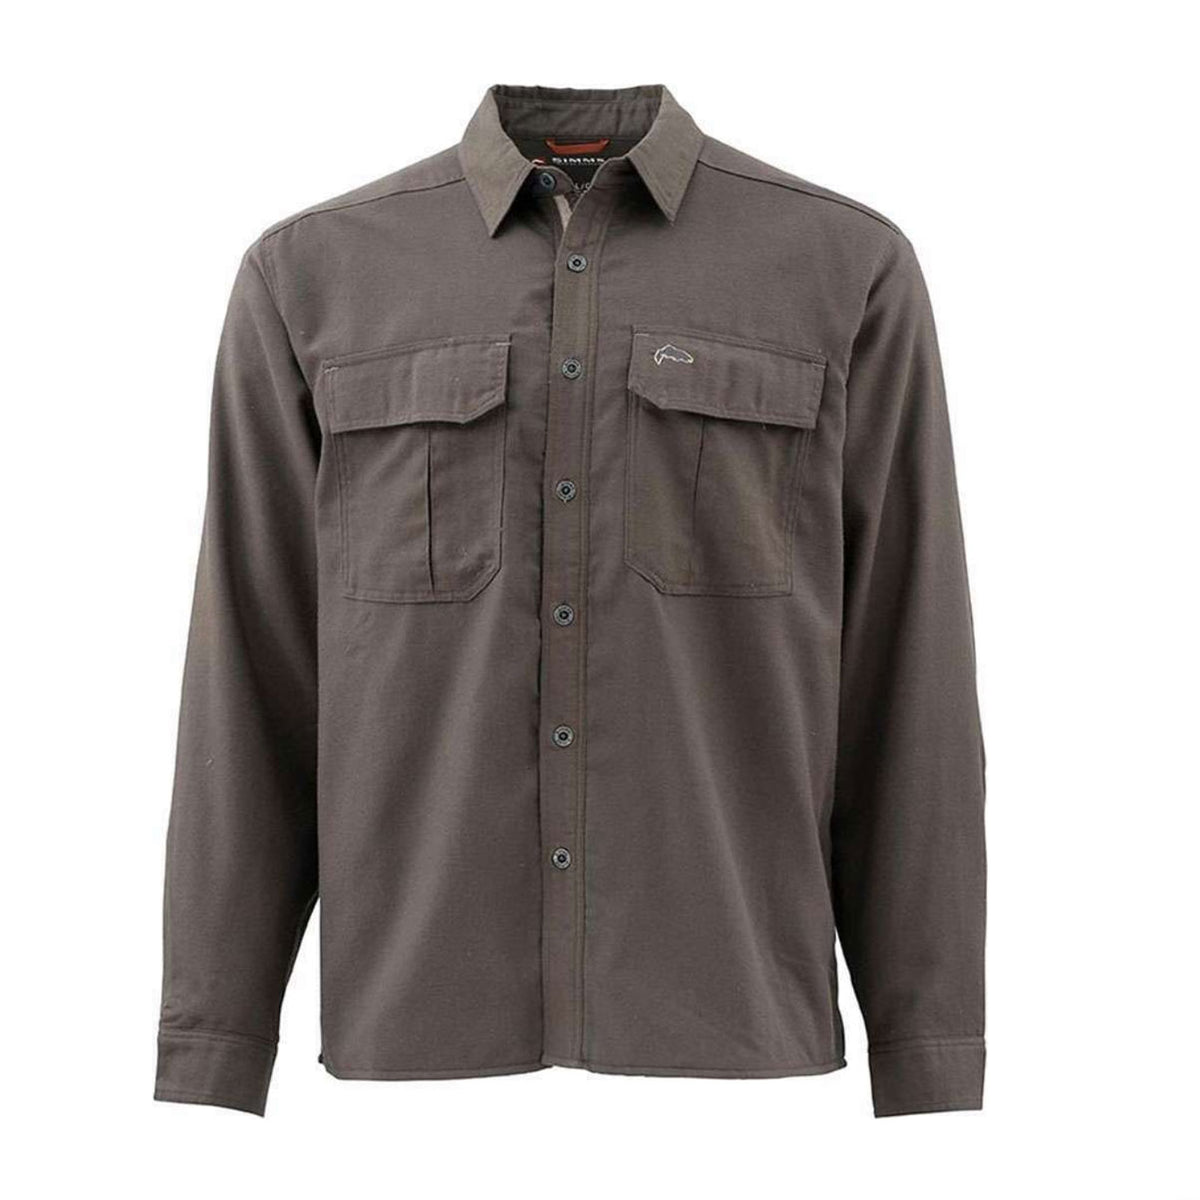 Simms Cold Weather Long Sleeve Shirt - Dark Olive